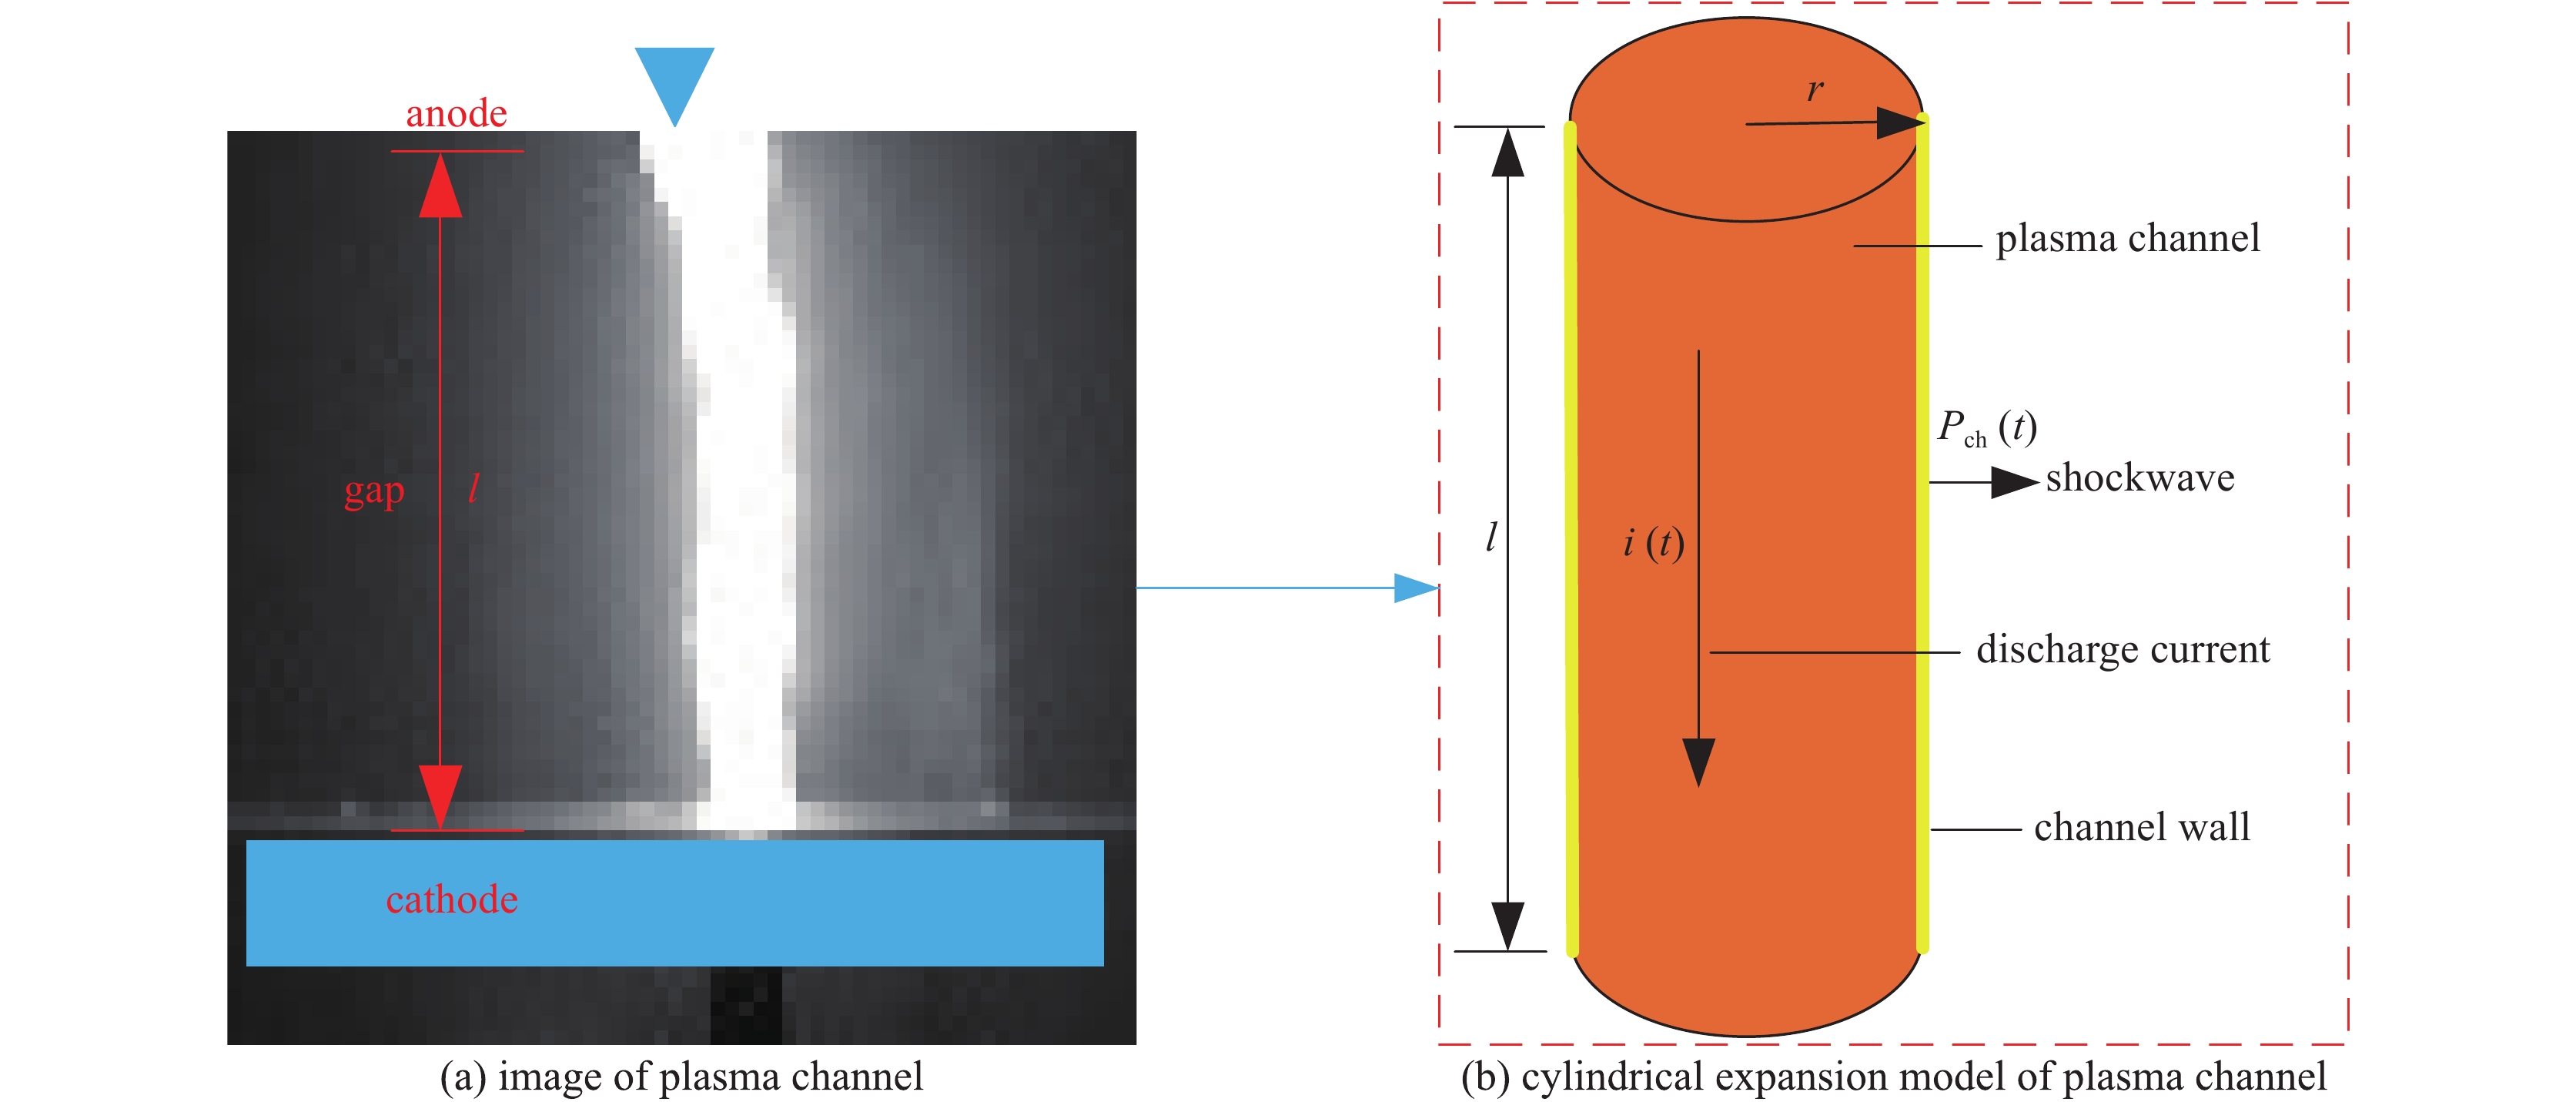 Image of the discharge plasma channel captured by high speed camera and the schematic of cylindrical expansion model